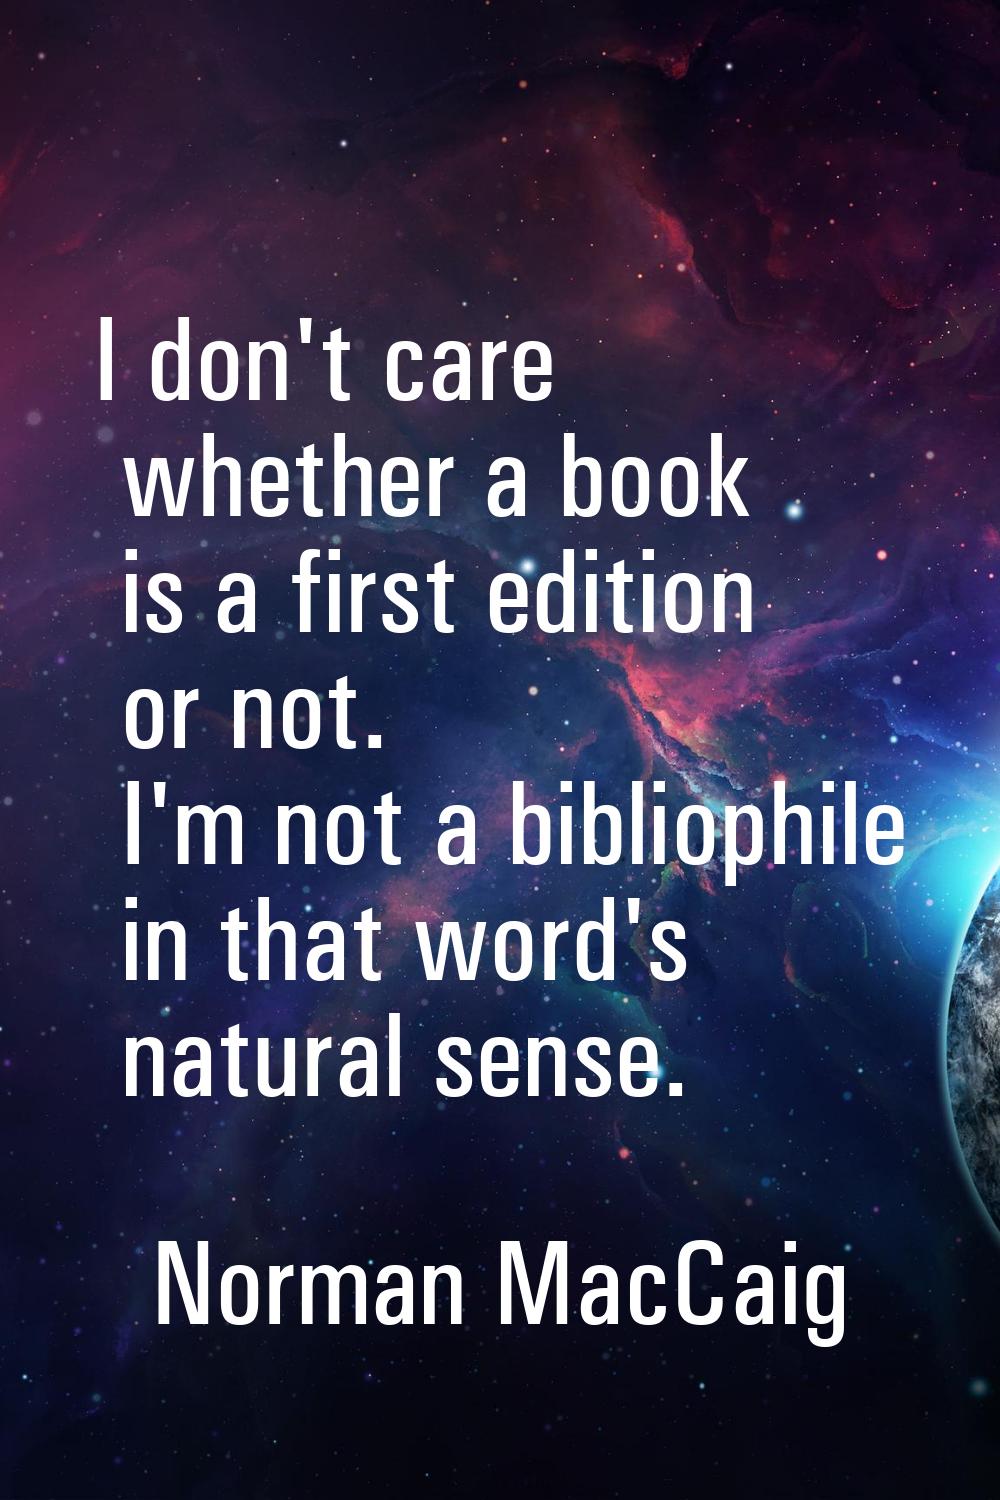 I don't care whether a book is a first edition or not. I'm not a bibliophile in that word's natural